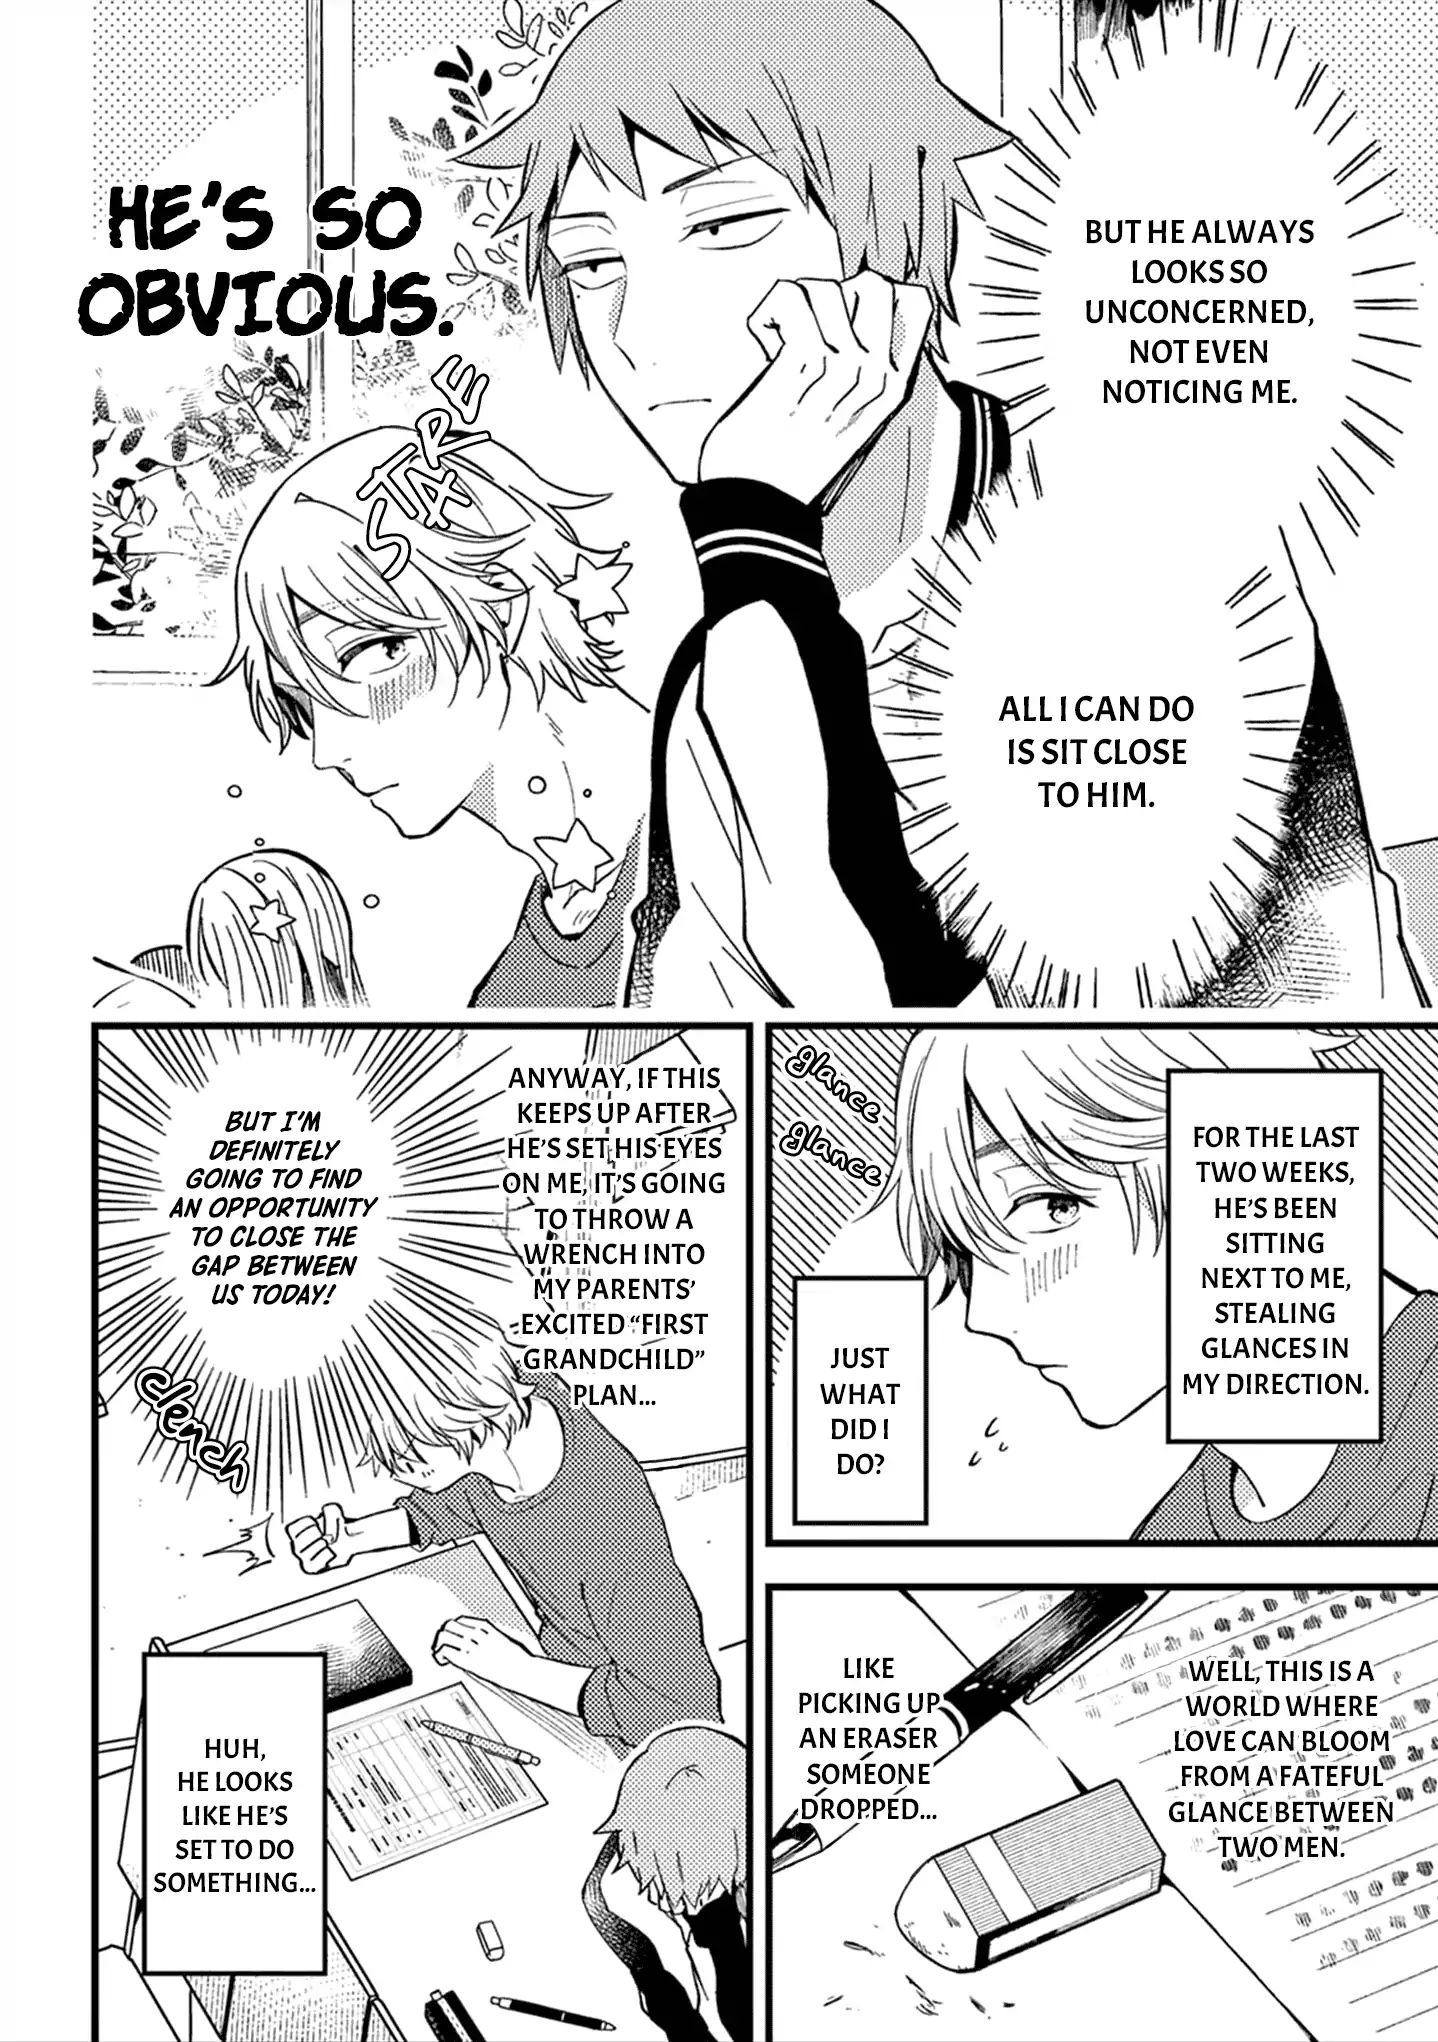 A World Where Everything Definitely Becomes Bl Vs. The Man Who Definitely Doesn't Want To Be In A Bl - Page 3